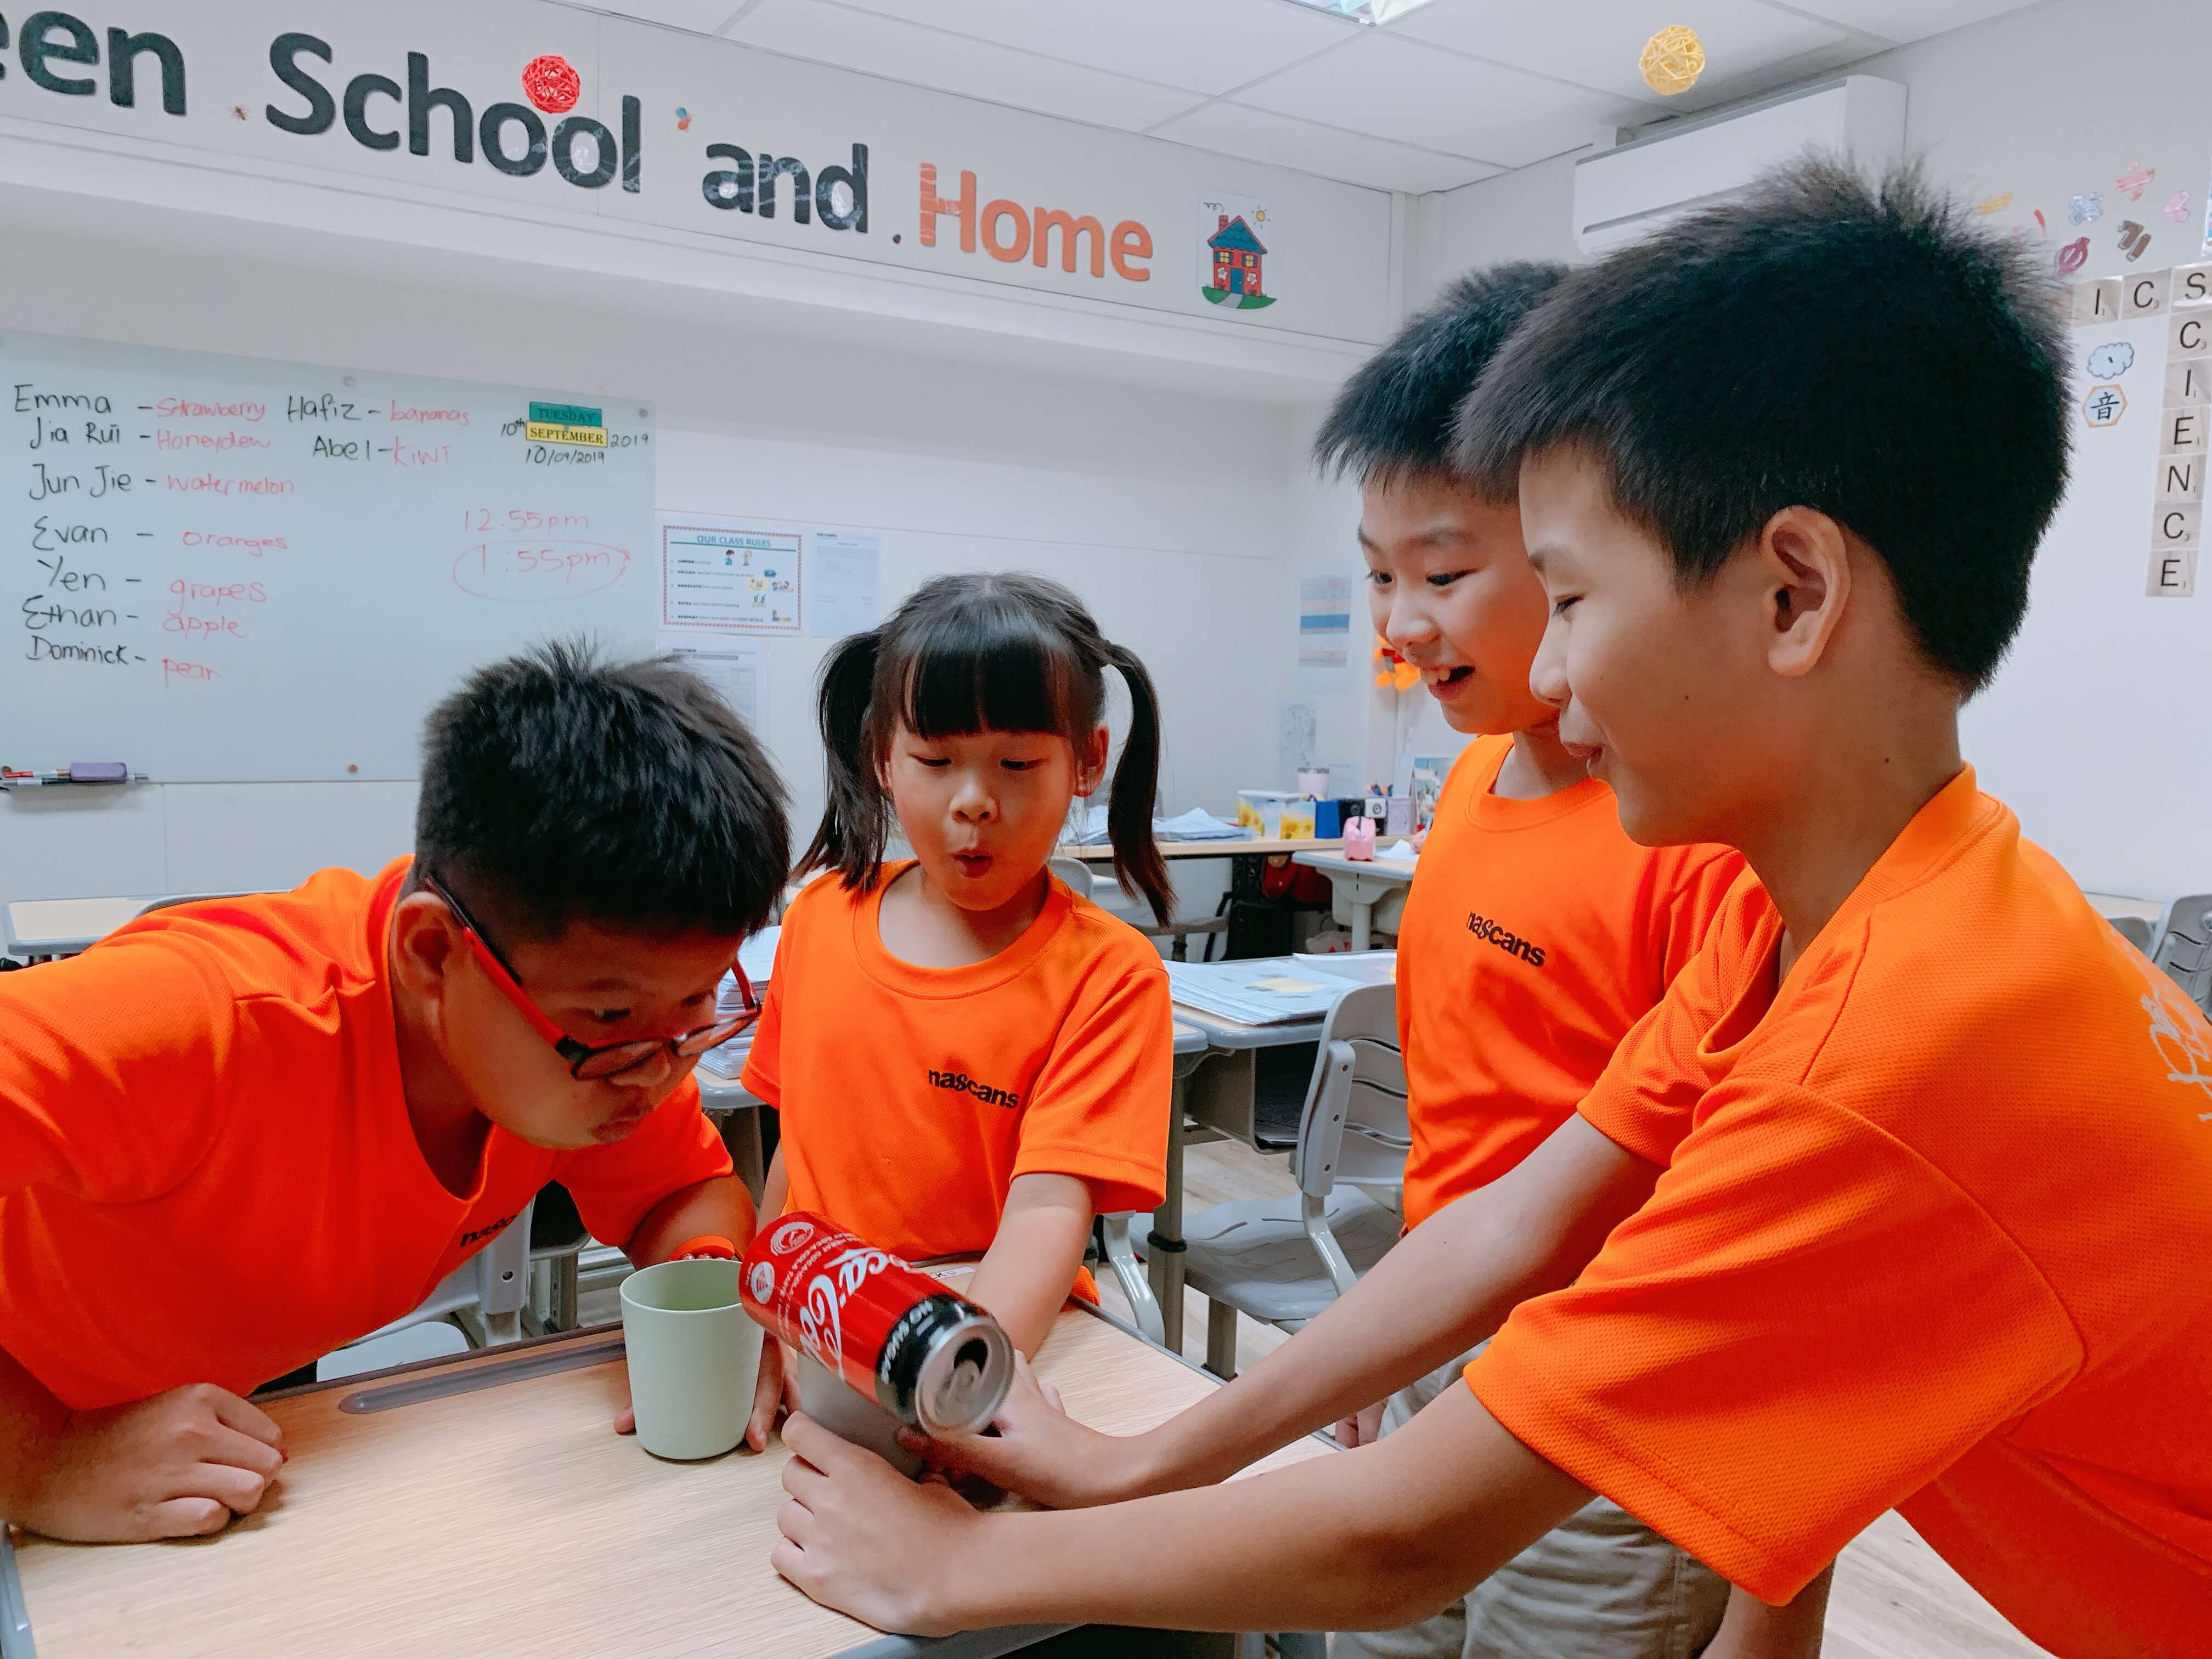 Student Care, After School Care Programme, School-Based vs Community Based Student Care at Jurong East